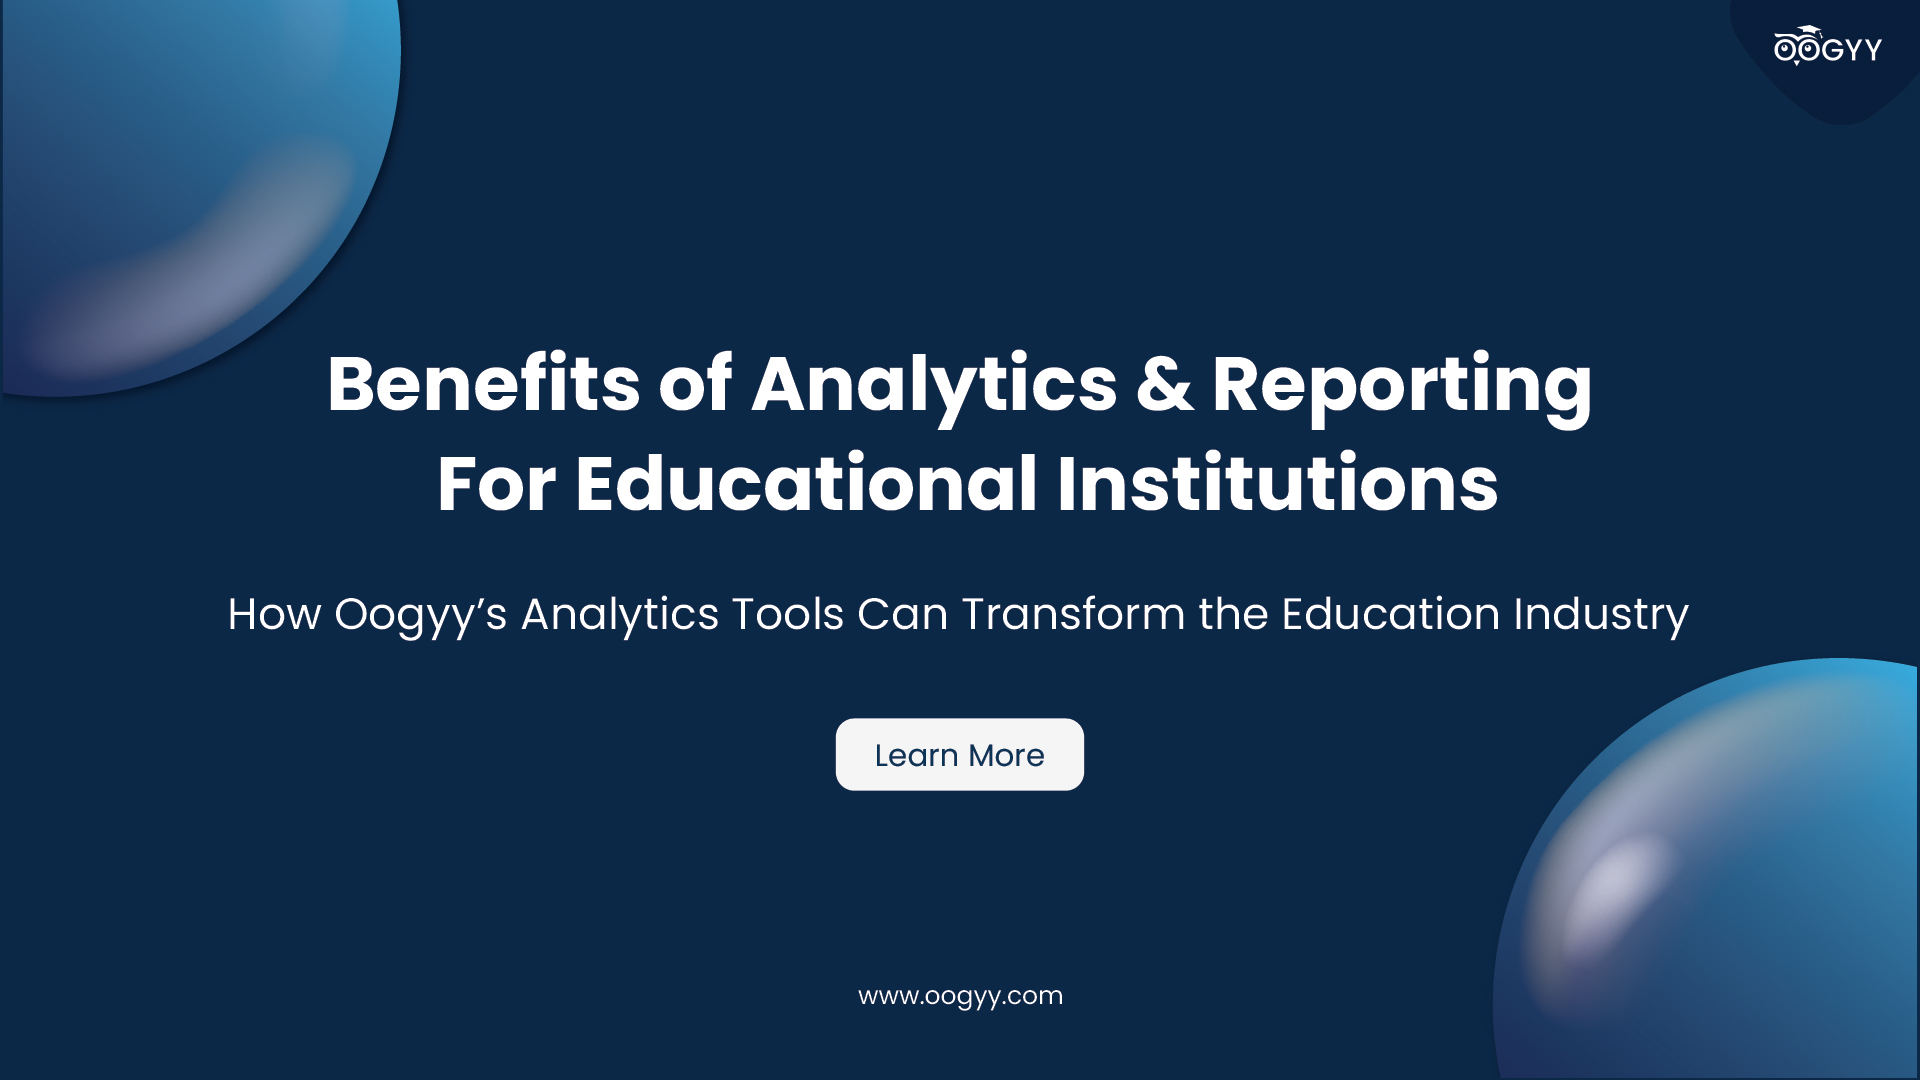 How Oogyy’s Analytics Tools Can Transform the Education Industry